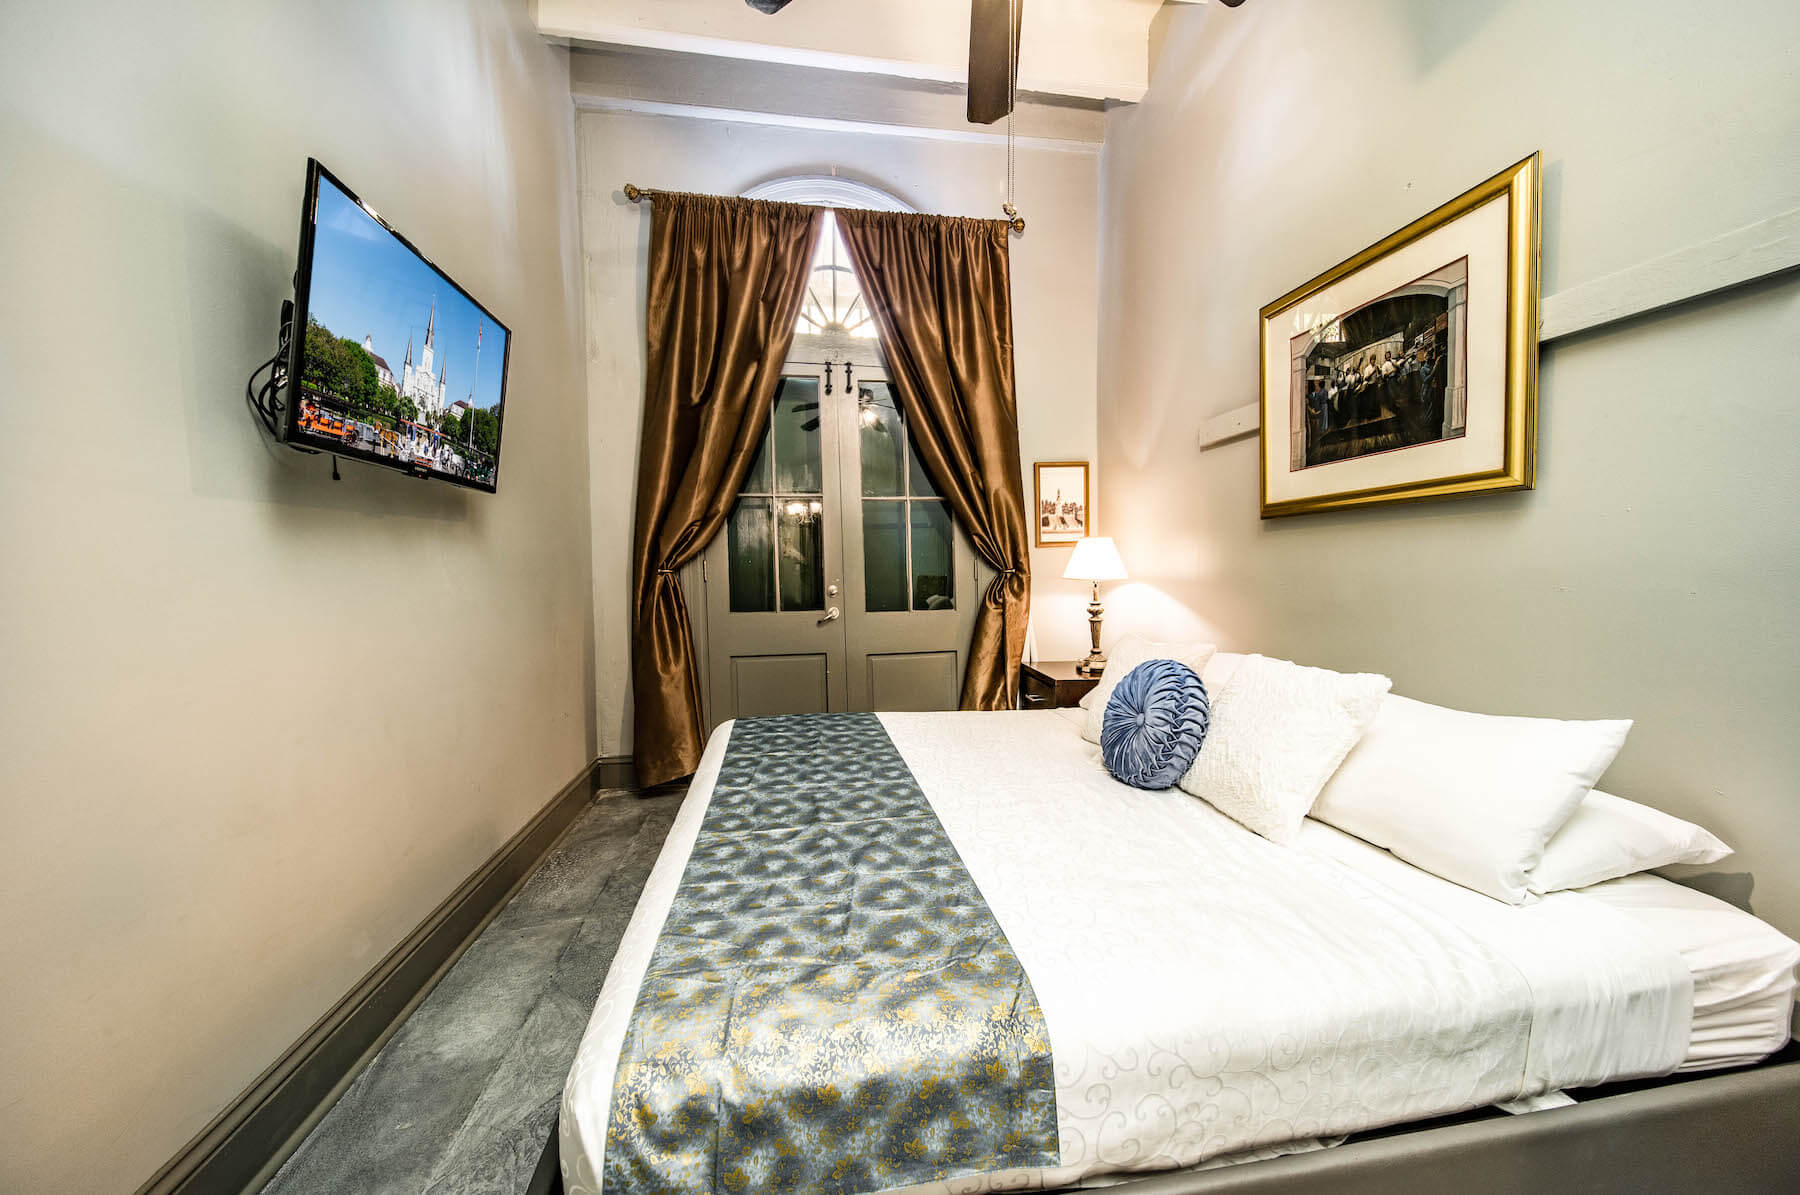 St. Philip Hotel, New Orleans - Claiborne #3, a New Orleans luxury rental